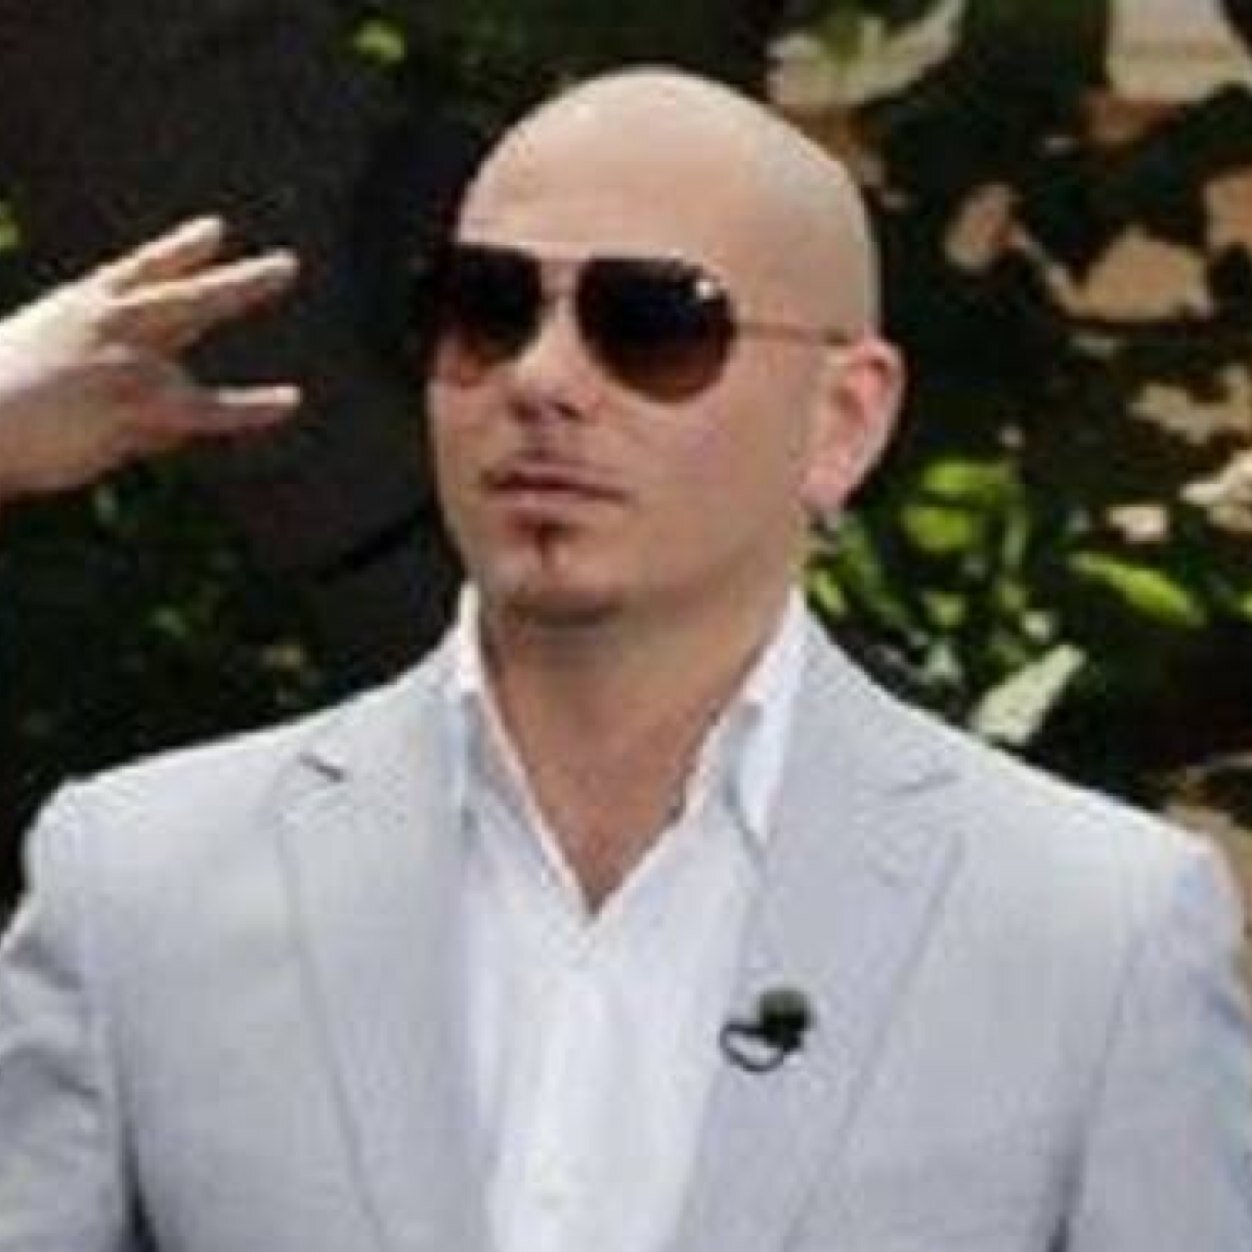 Official account for @Pitbull's glasses